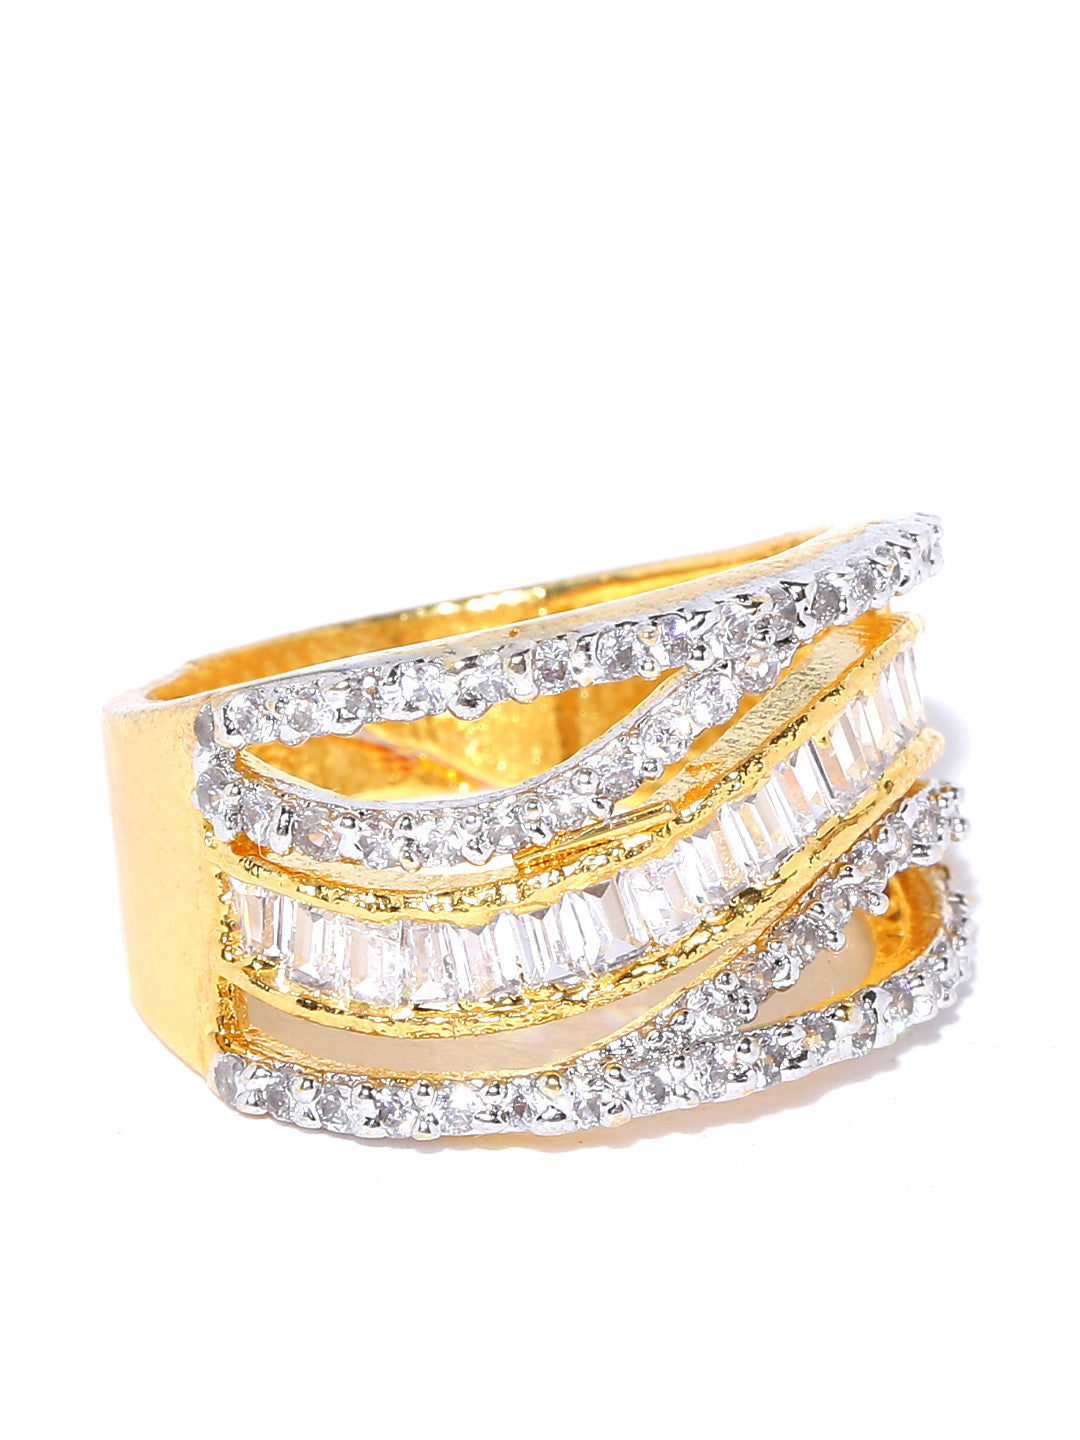 Gold-Plated American Diamond Studded Adjustable Ring